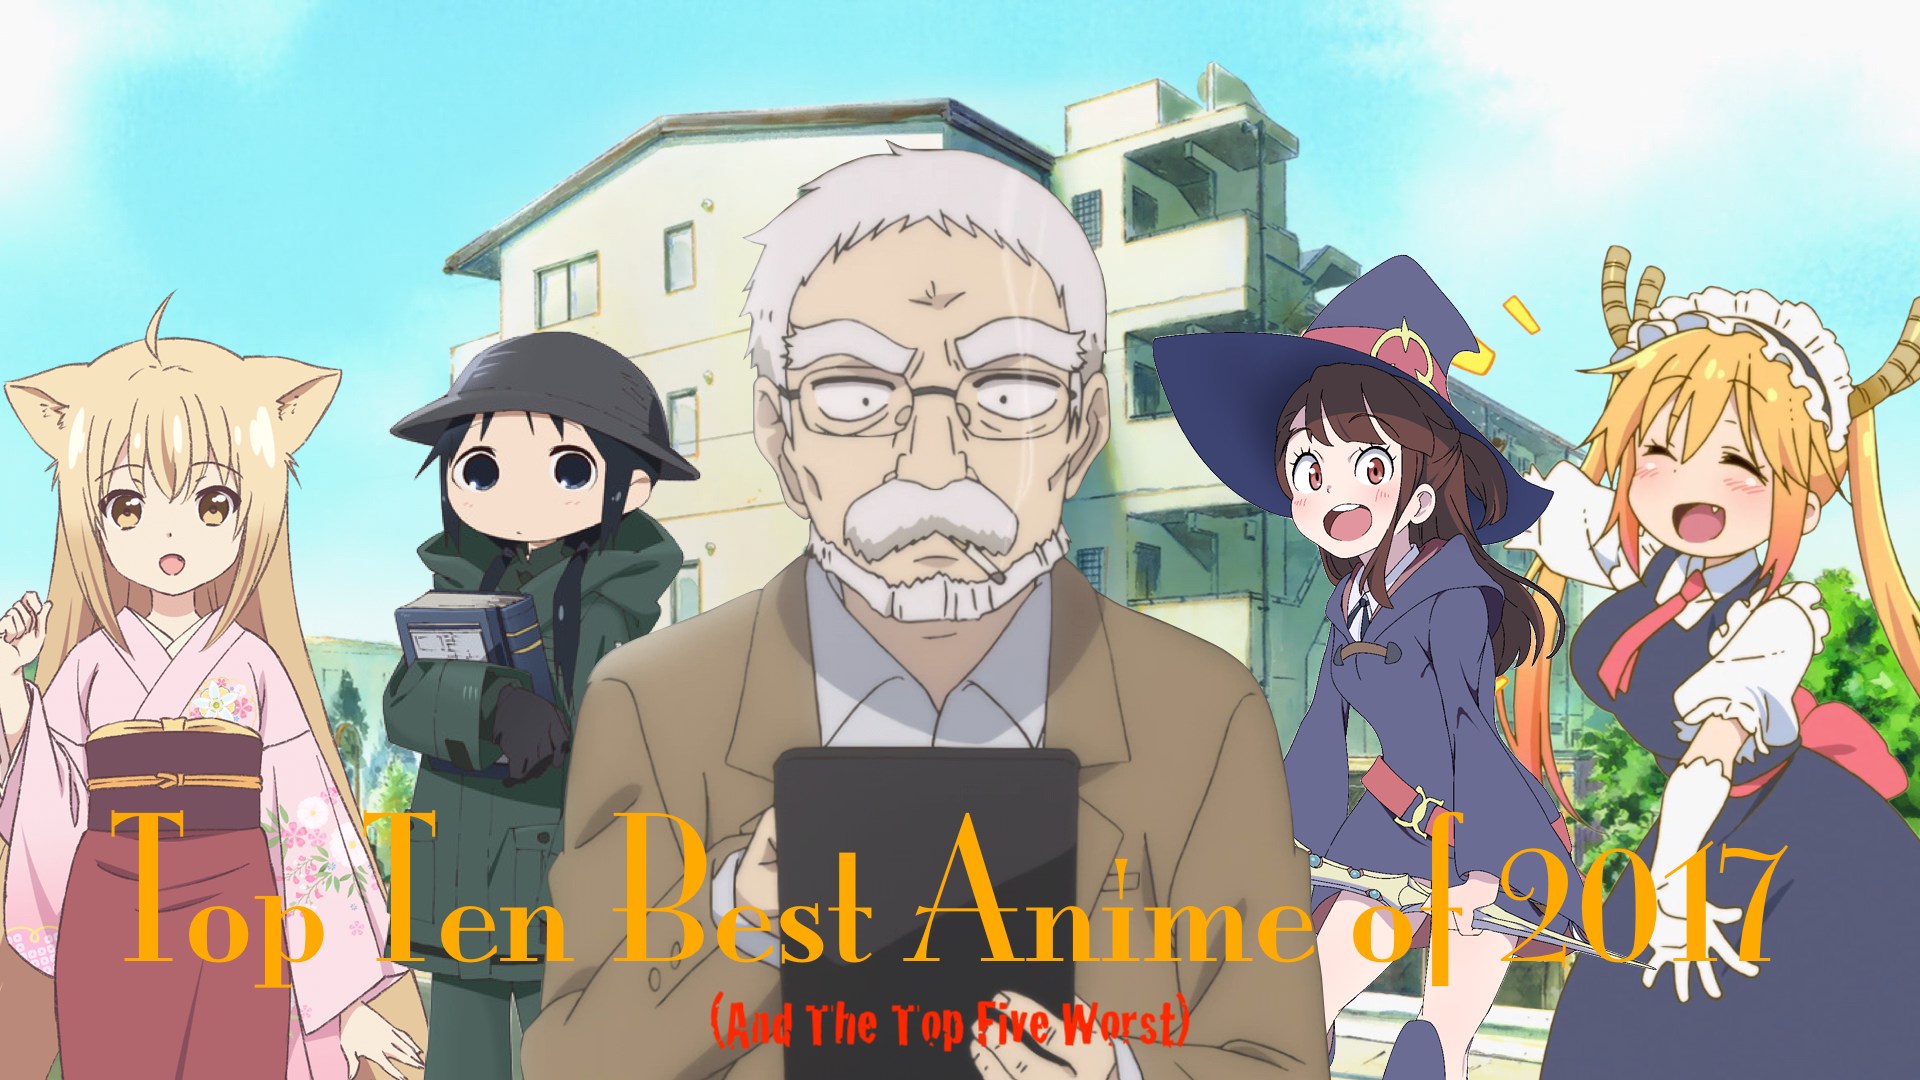 KBD's Top Ten Best Anime of 2017 (And The Top Five Worst) - B3 - The Boston  Bastard Brigade |